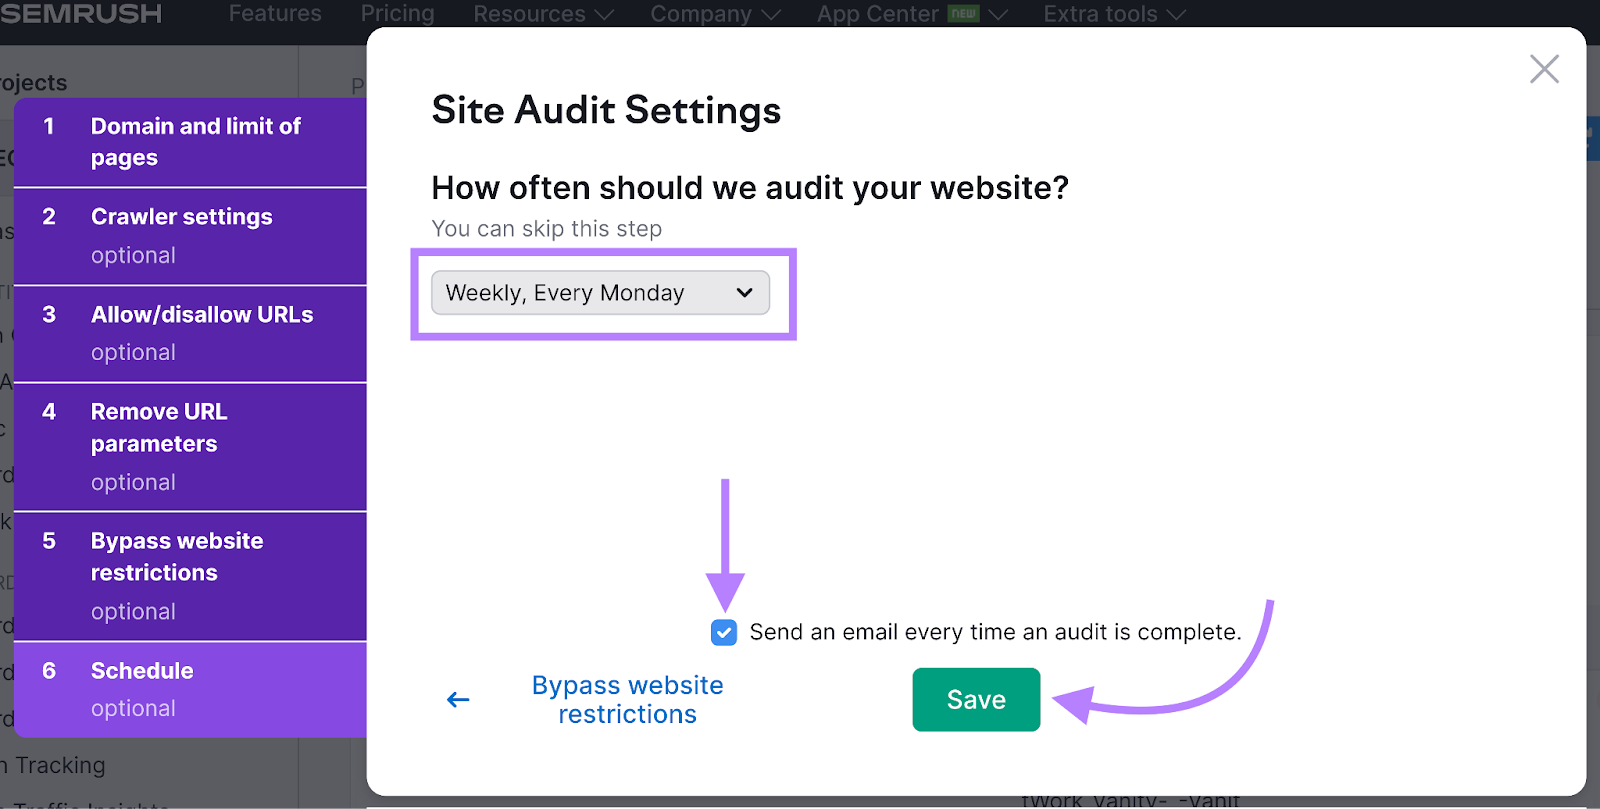 Scheduling weekly audits